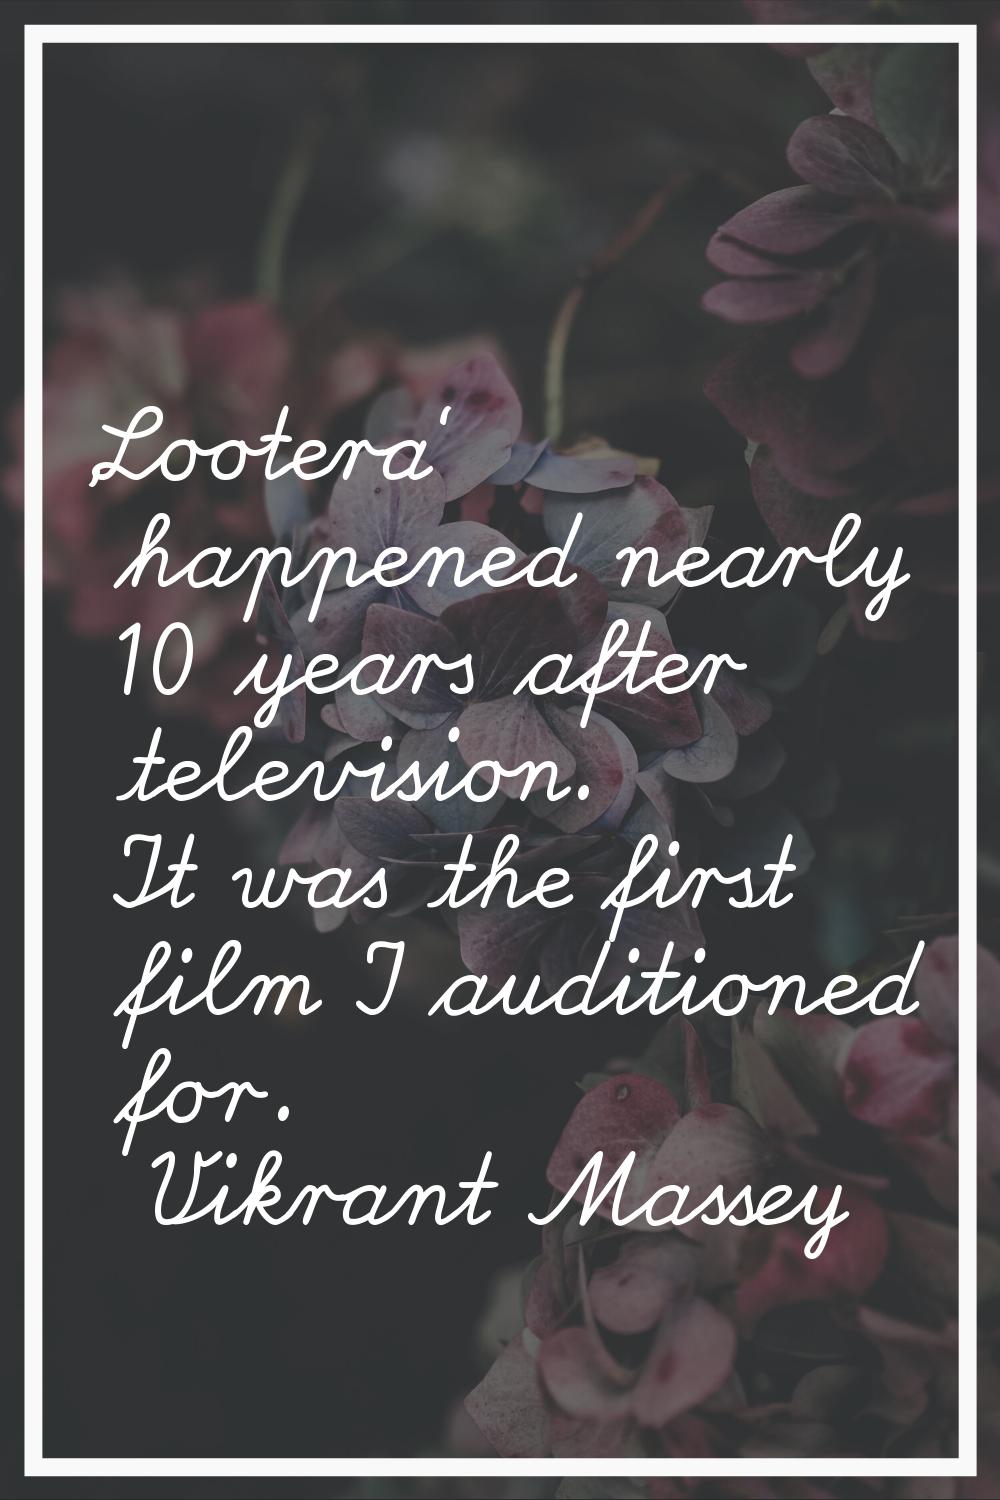 'Lootera' happened nearly 10 years after television. It was the first film I auditioned for.